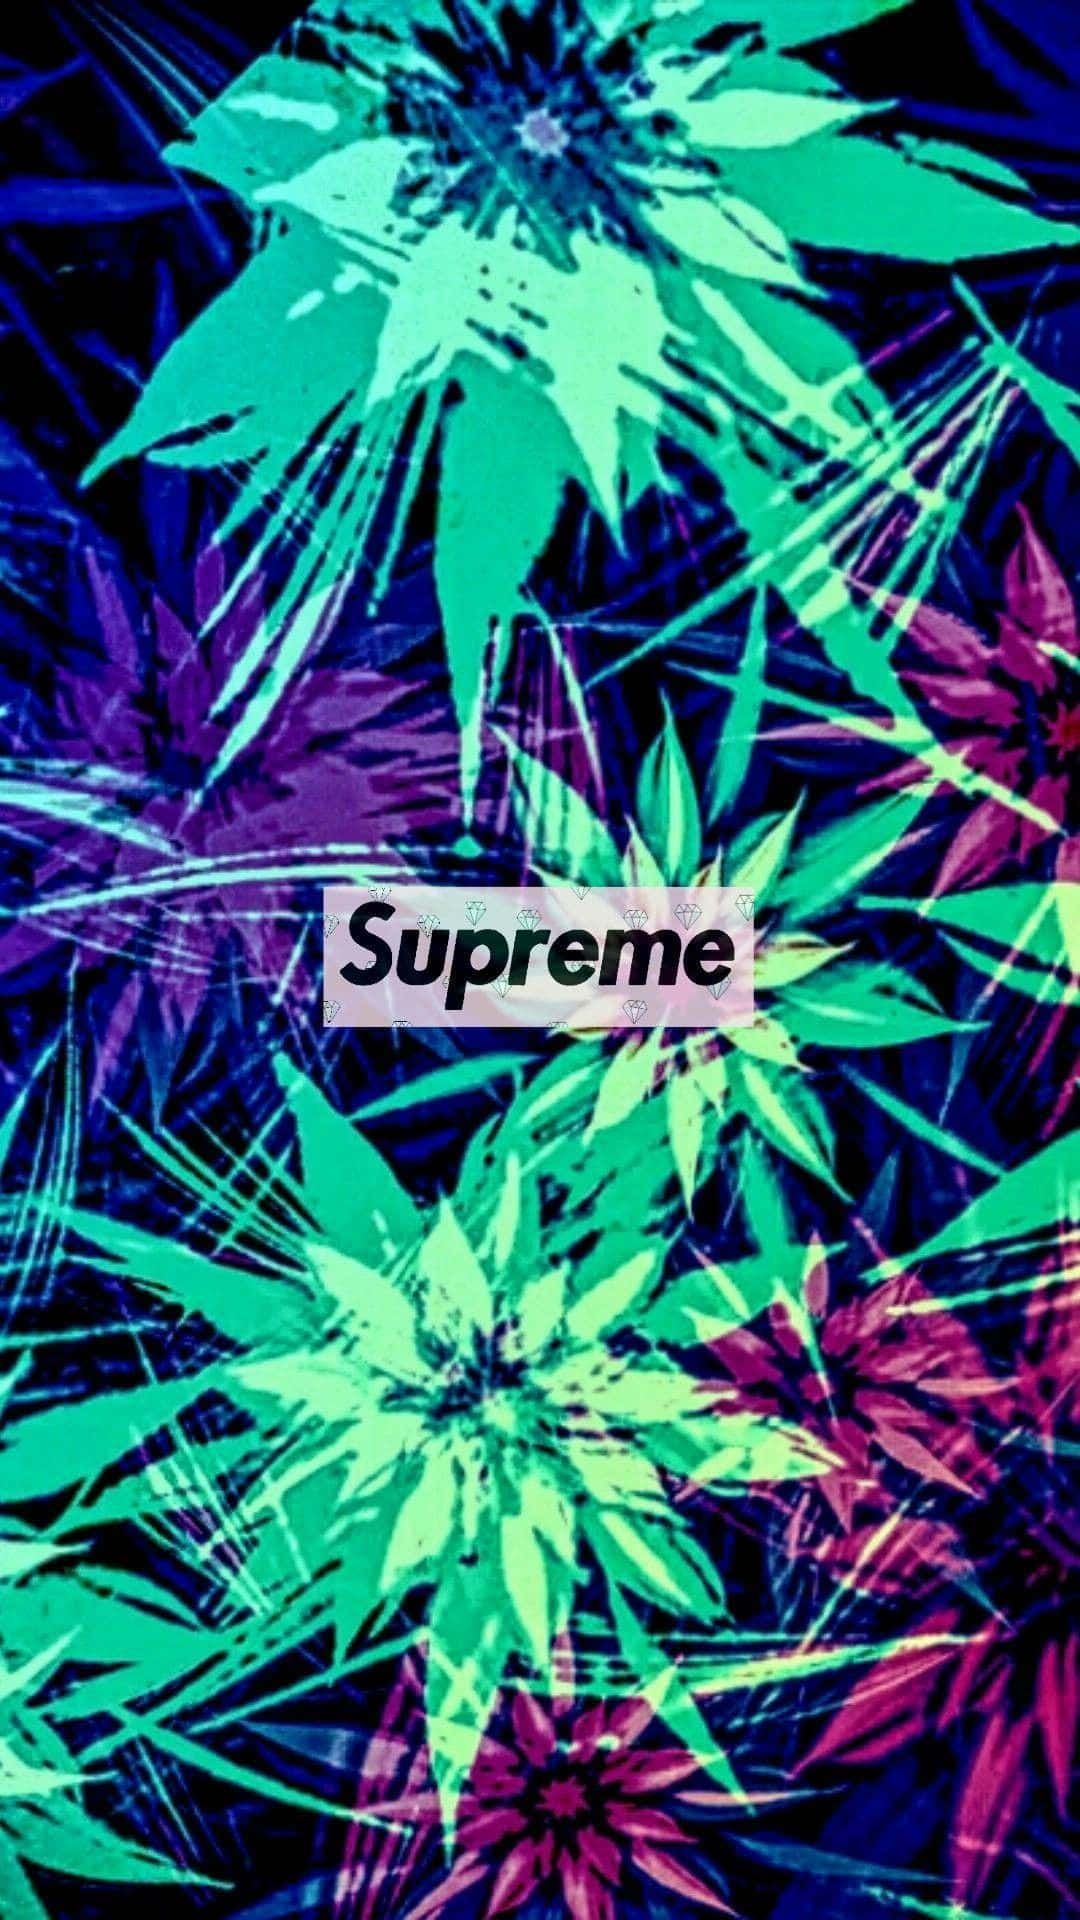 Supreme Wallpapers - Hd Wallpapers